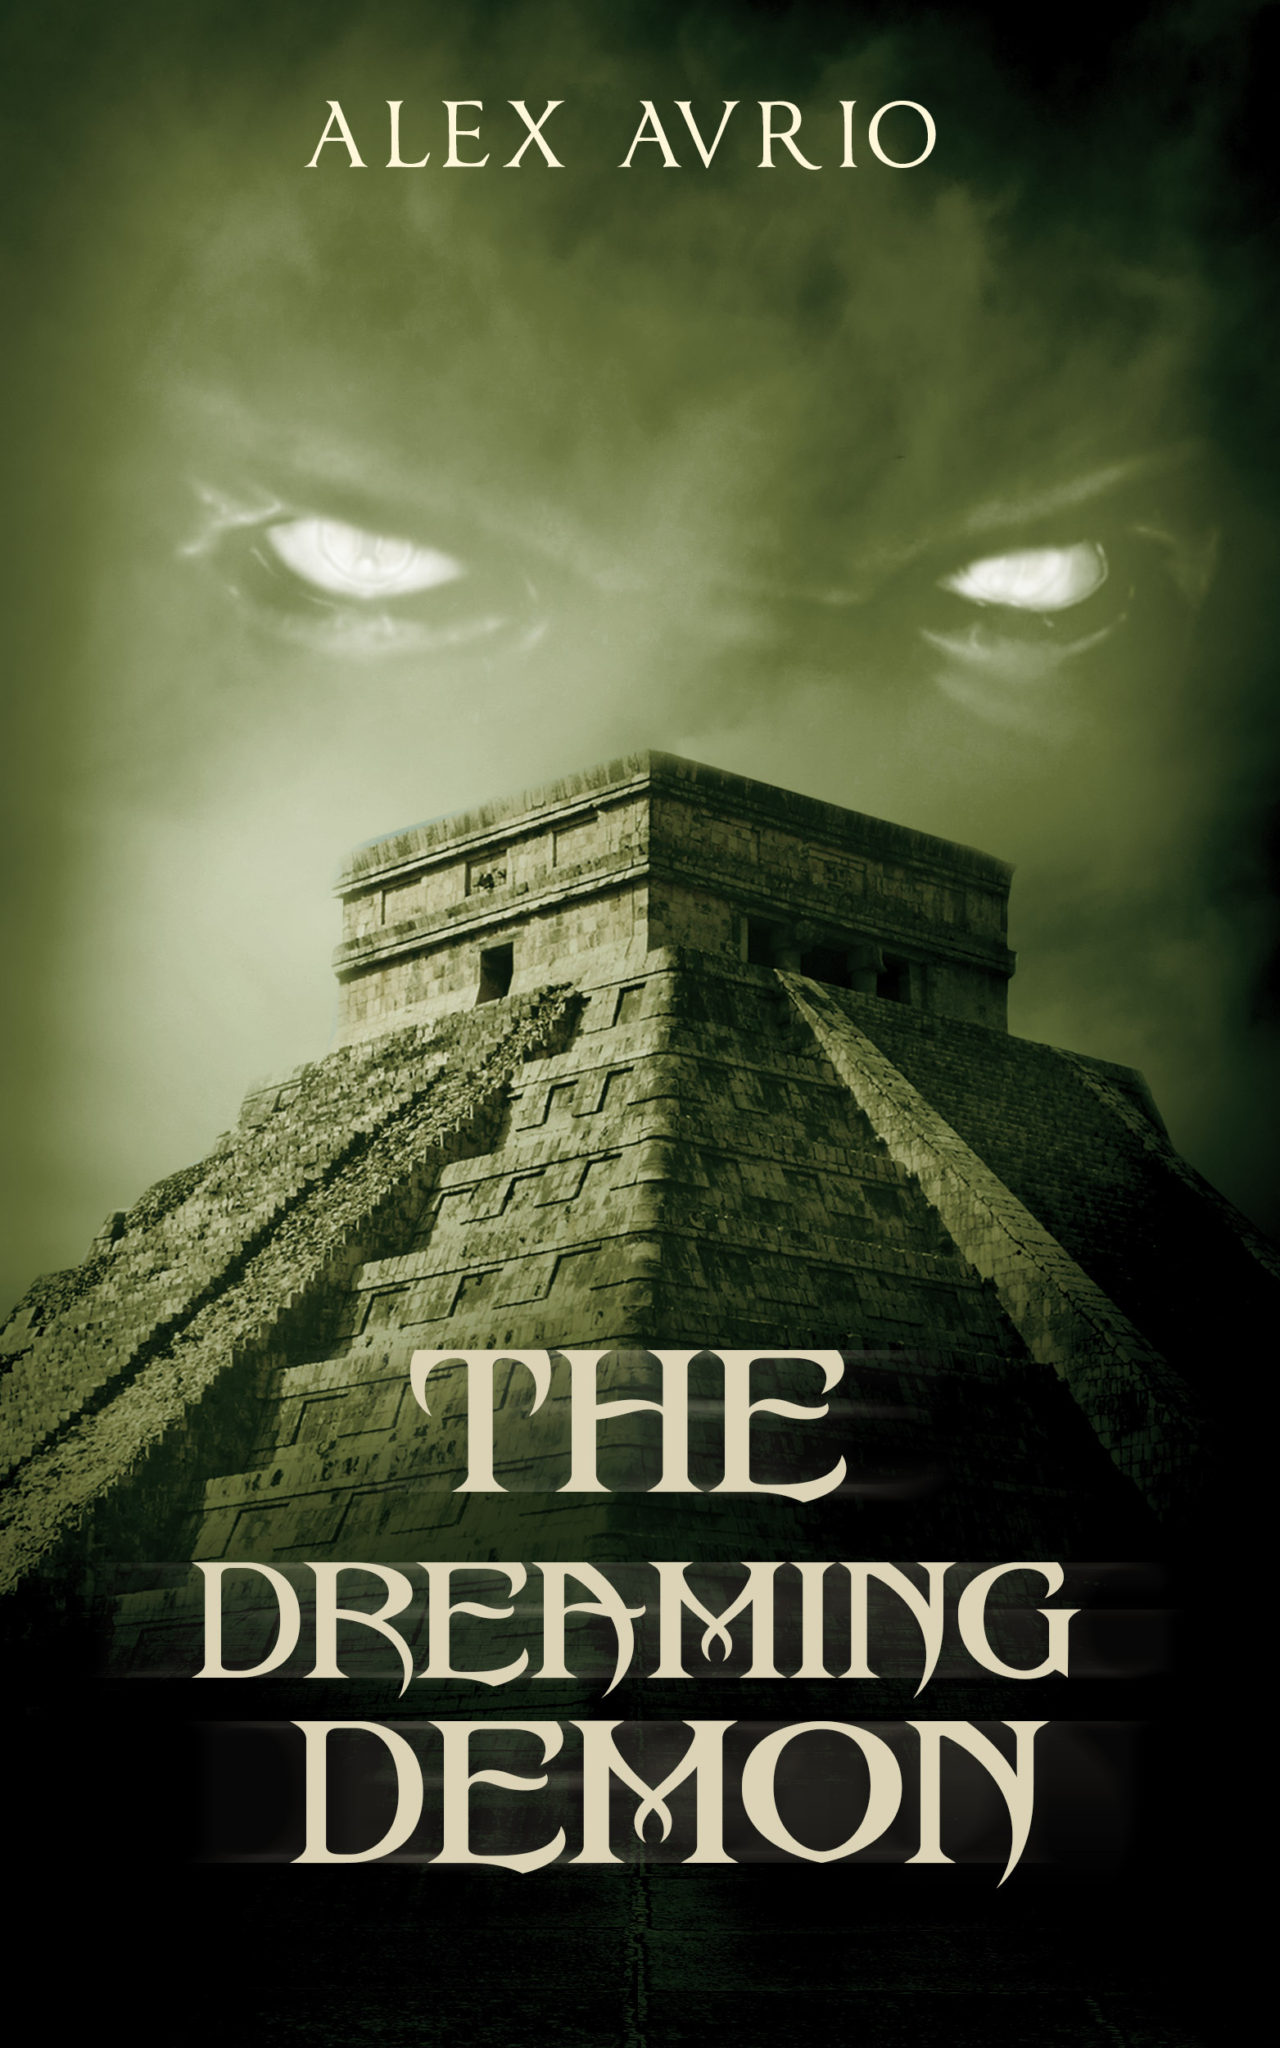 FREE: The Dreaming Demon by Alex Avrio